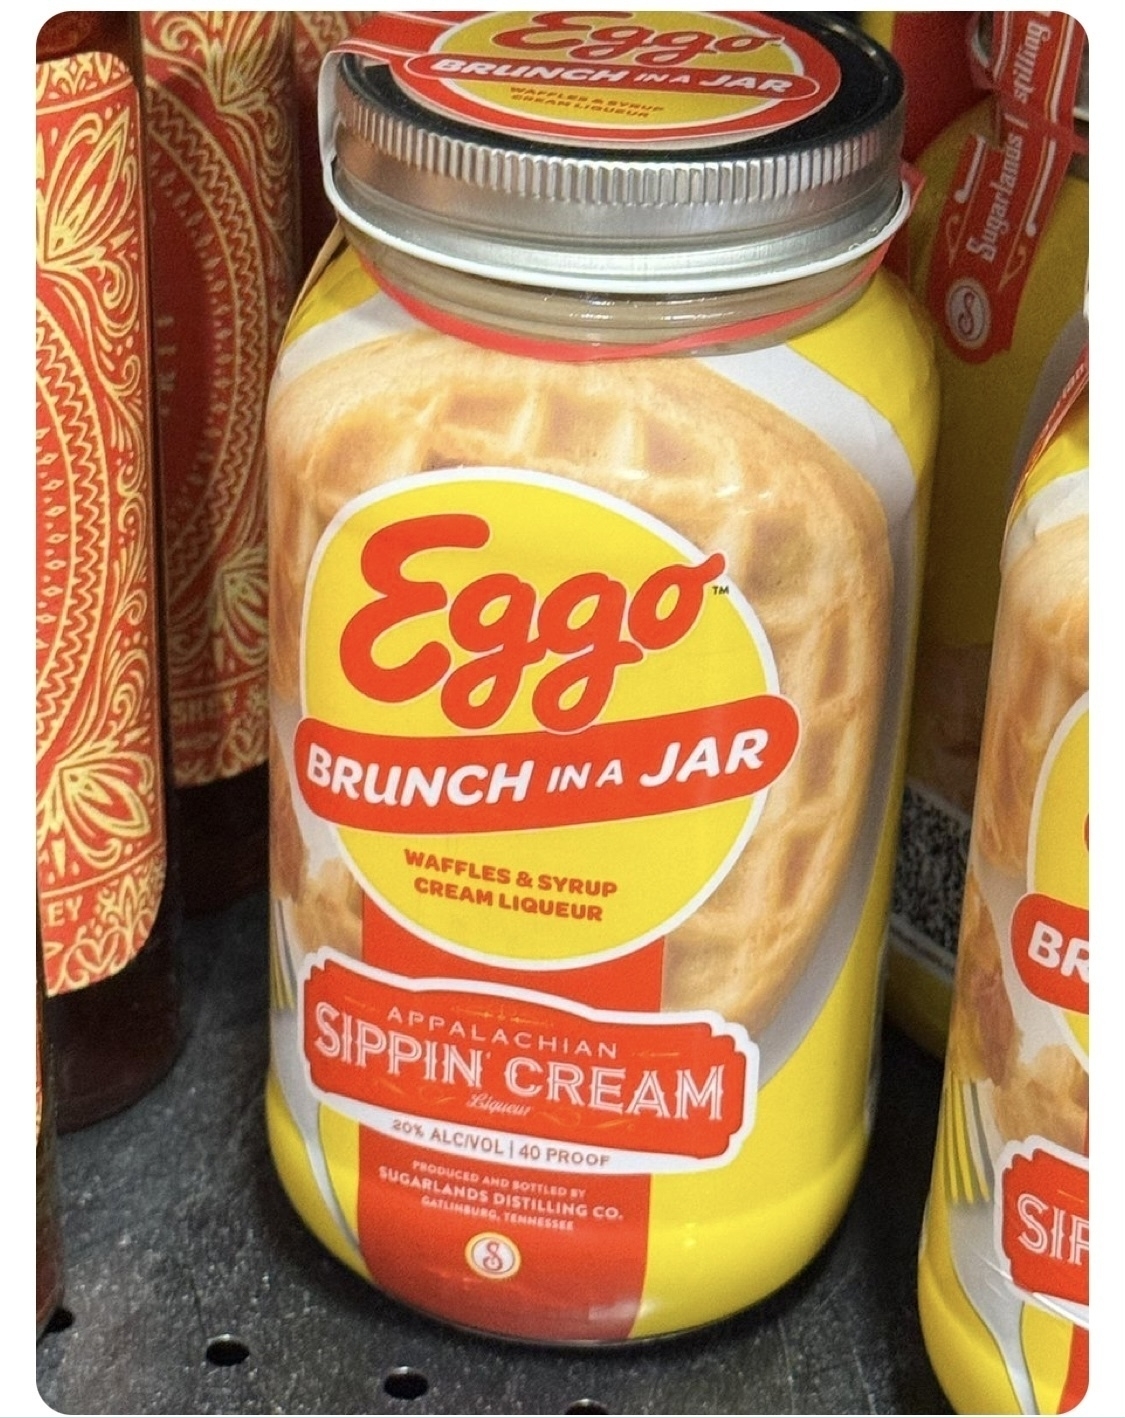 A sealed glass jar with a printed commercial label "Eggo Brunch in a Jar waffles & syrup cream liquer Appalachian Sippin Cream" with additional small print that I am becoming too nauseated to transcribe